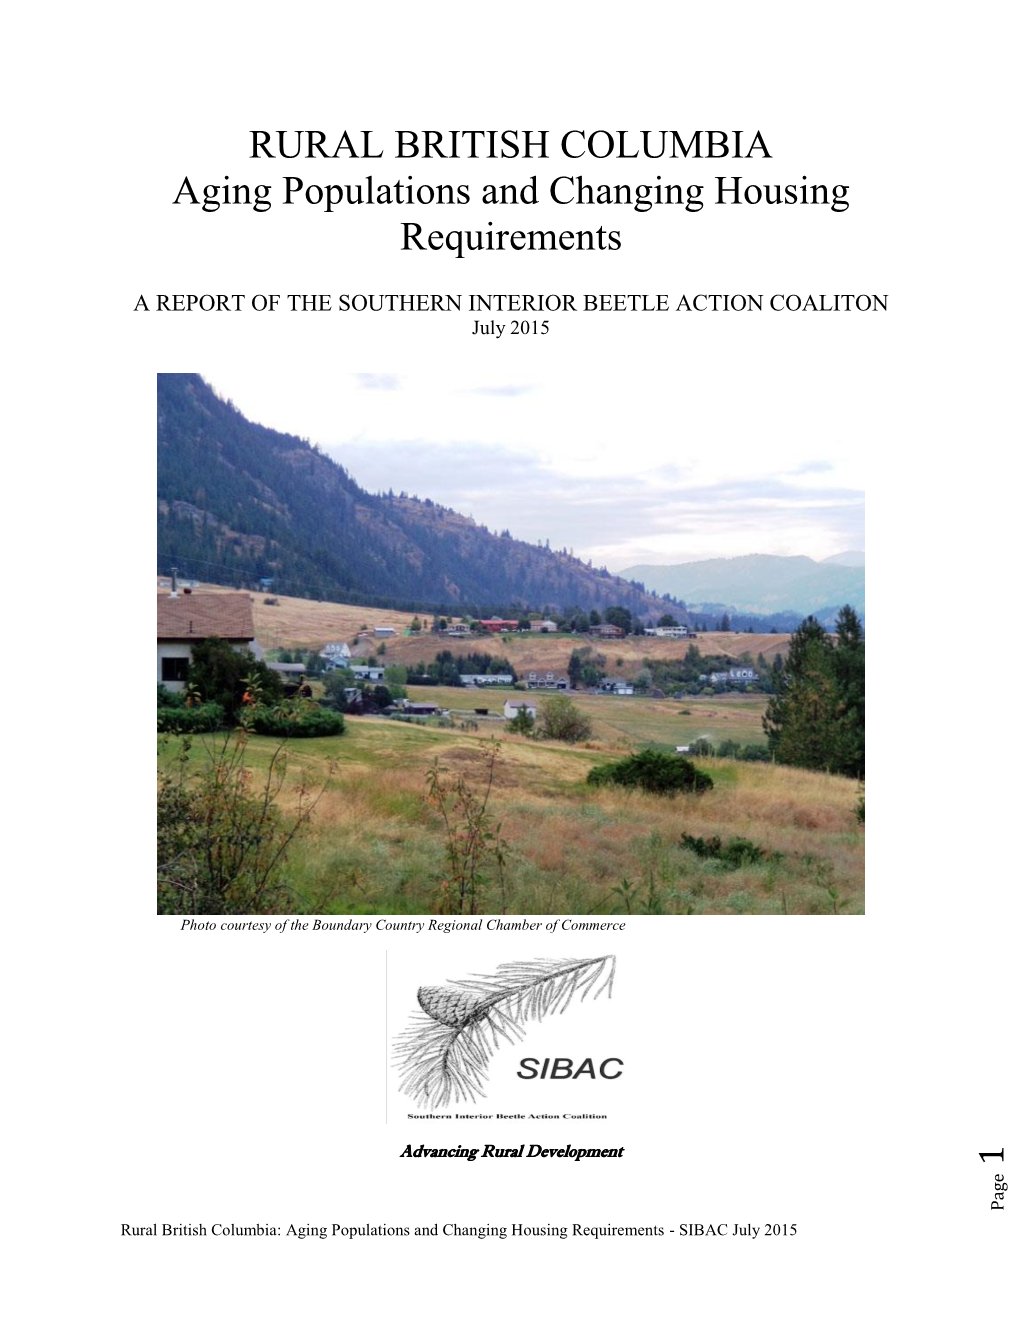 Rural British Columbia: Aging Populations and Changing Housing Requirements - SIBAC July 2015